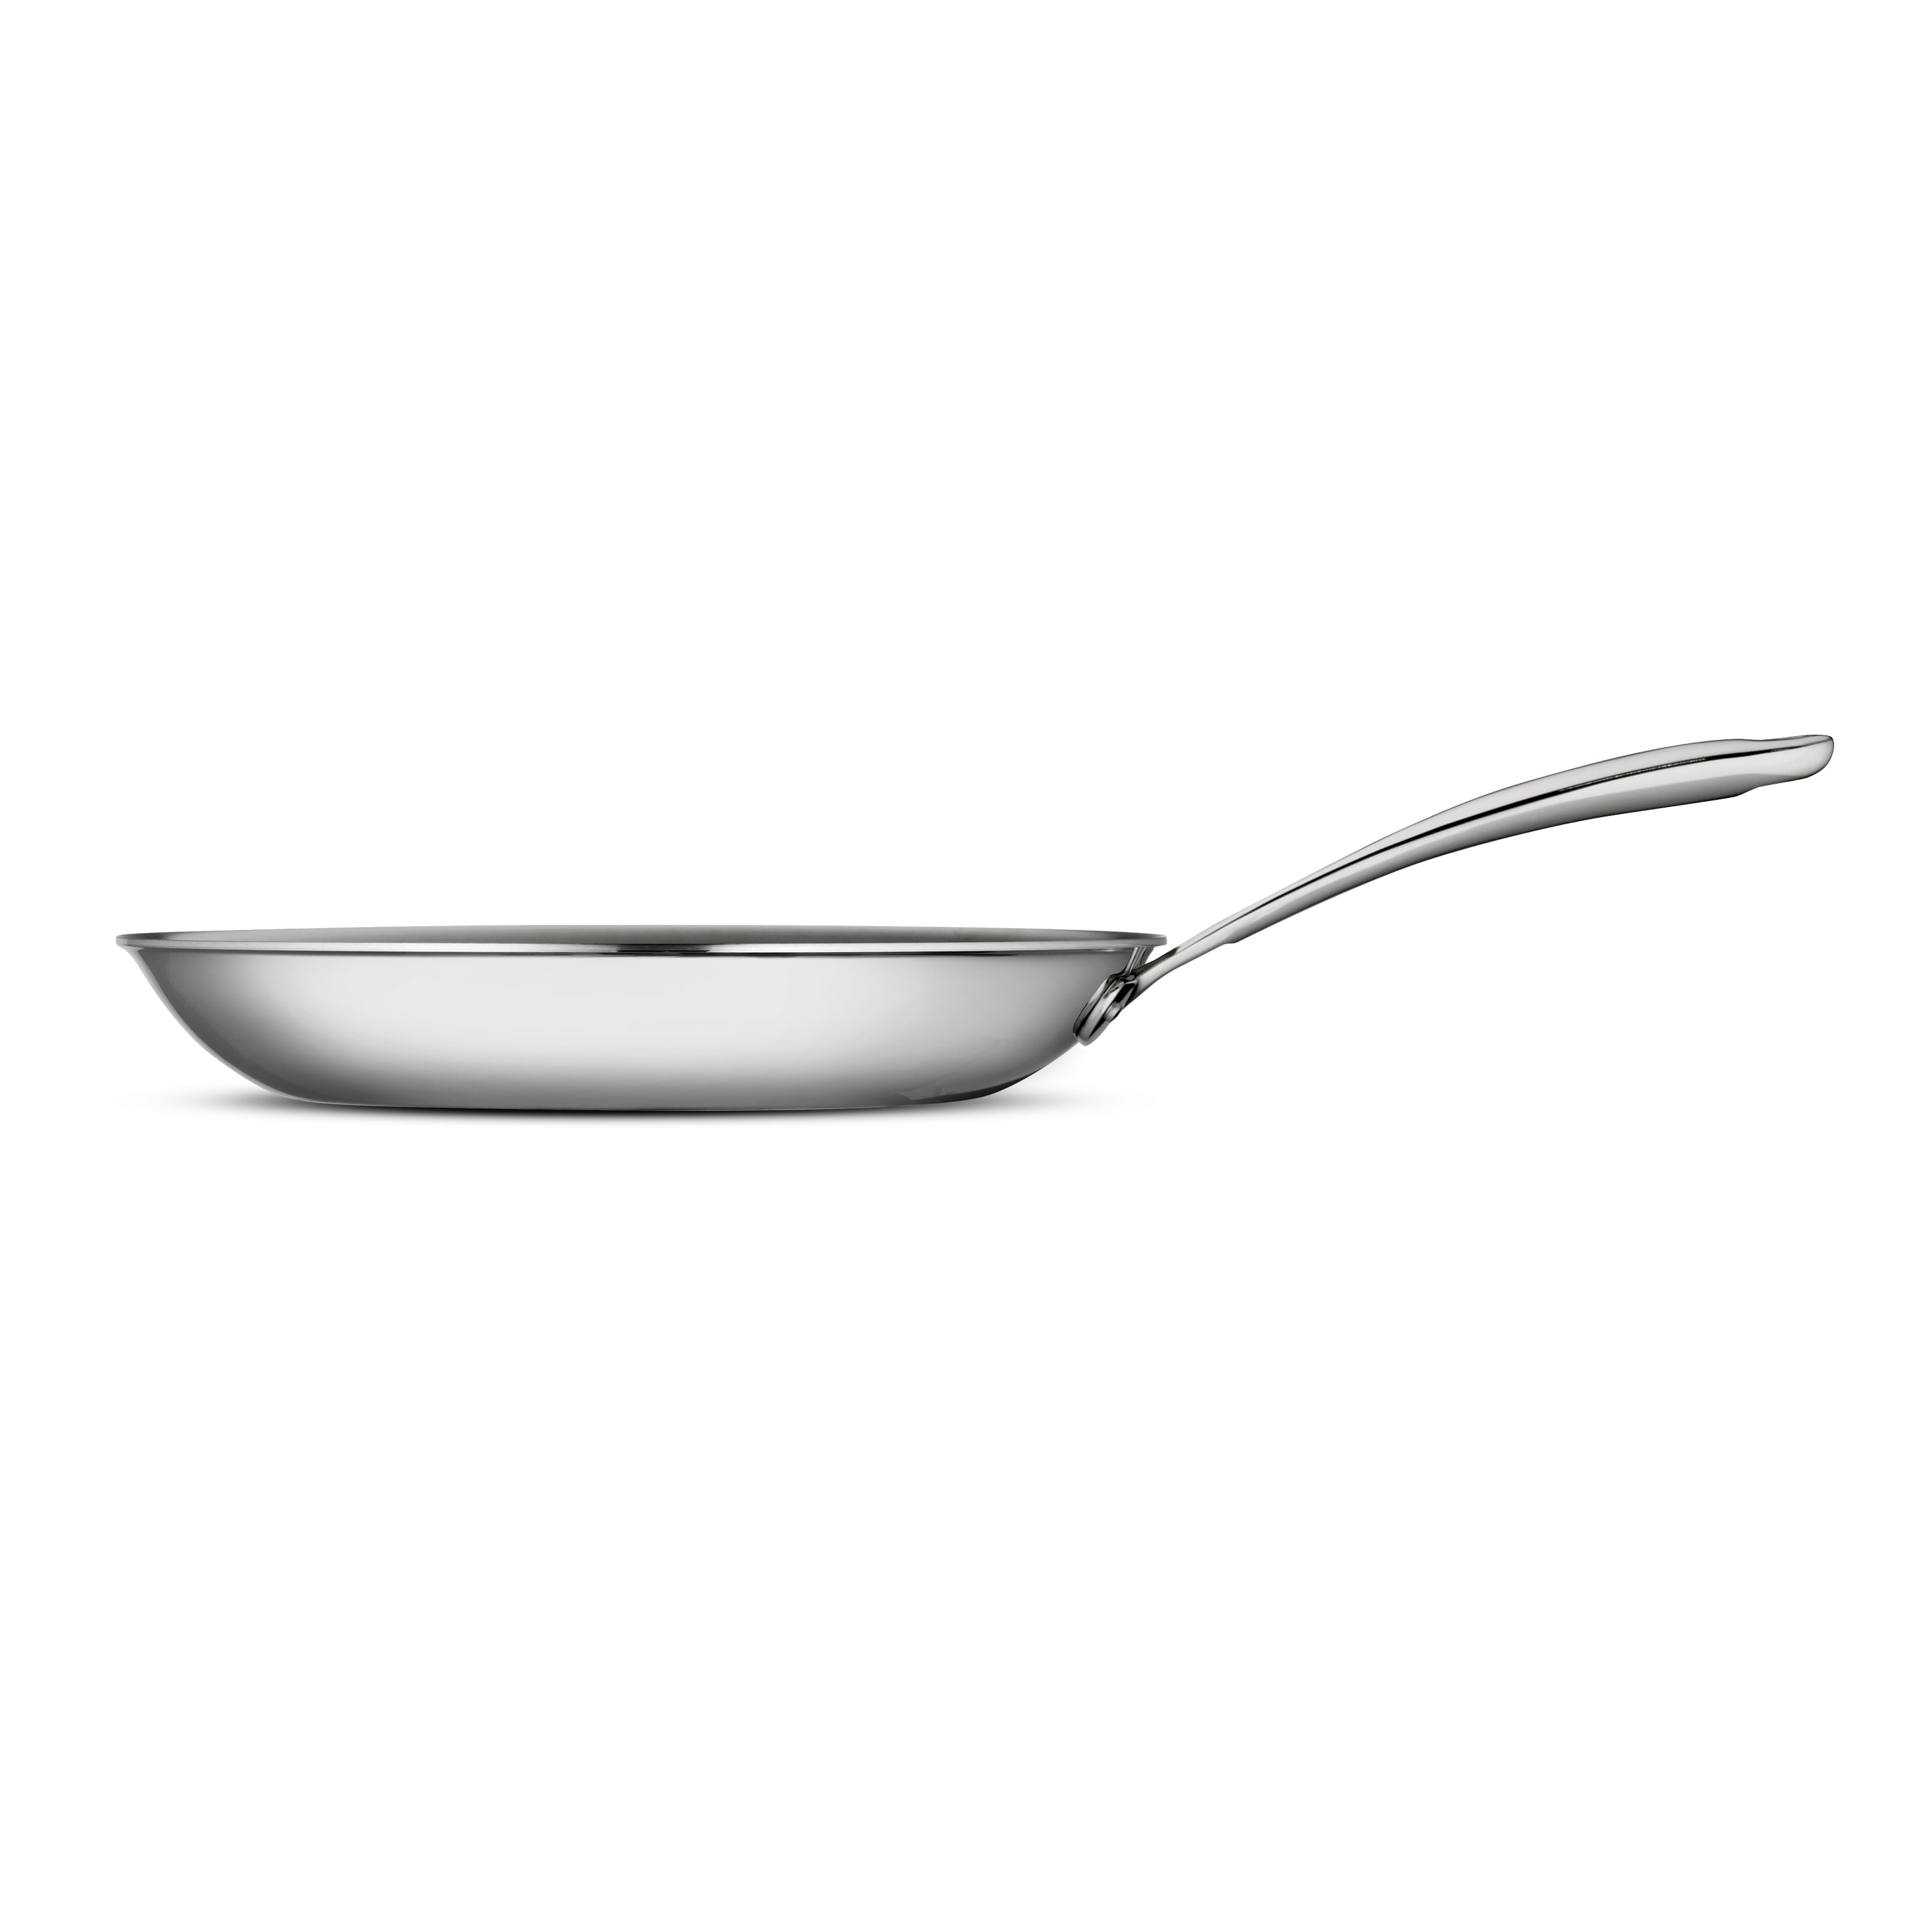 Tri-ply Stainless Steel Diamond Nonstick Frying Pan, 12 inch, 12 INCH -  Fry's Food Stores